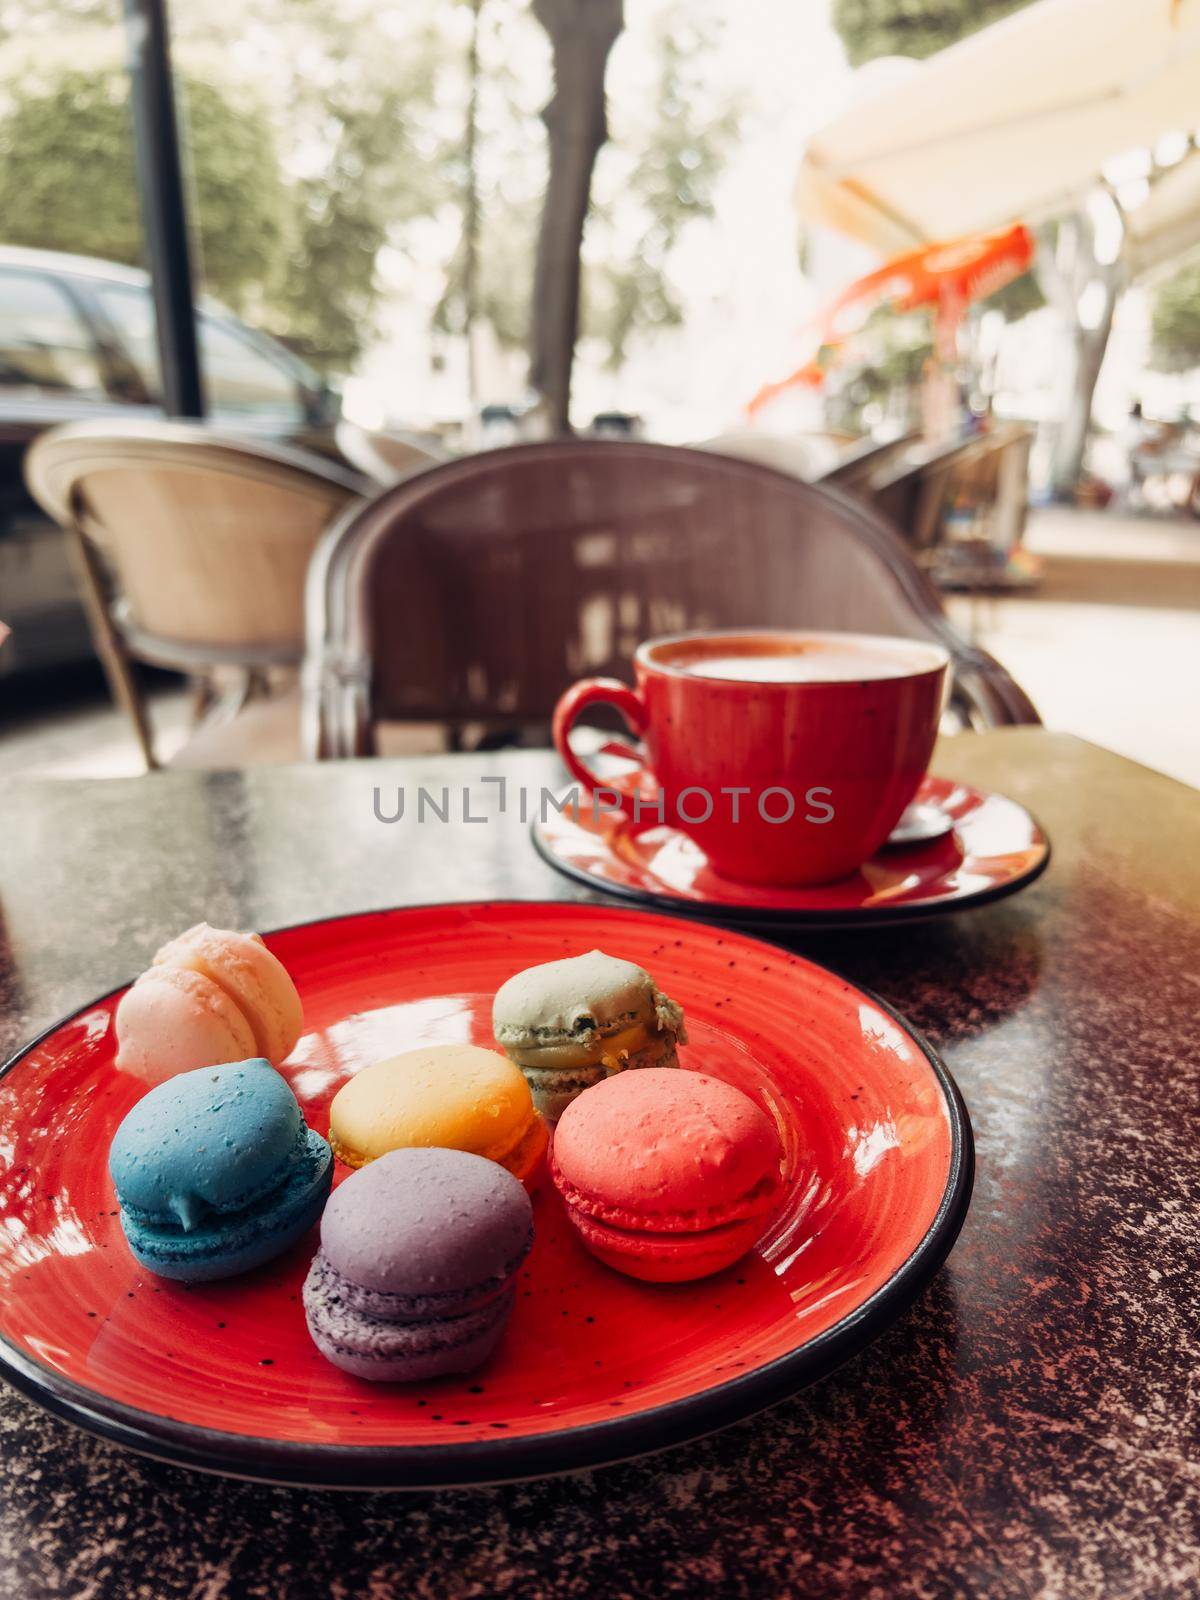 A close up picture of colourful macaron macaroon cakes and coffee mug taken in a street cafe.